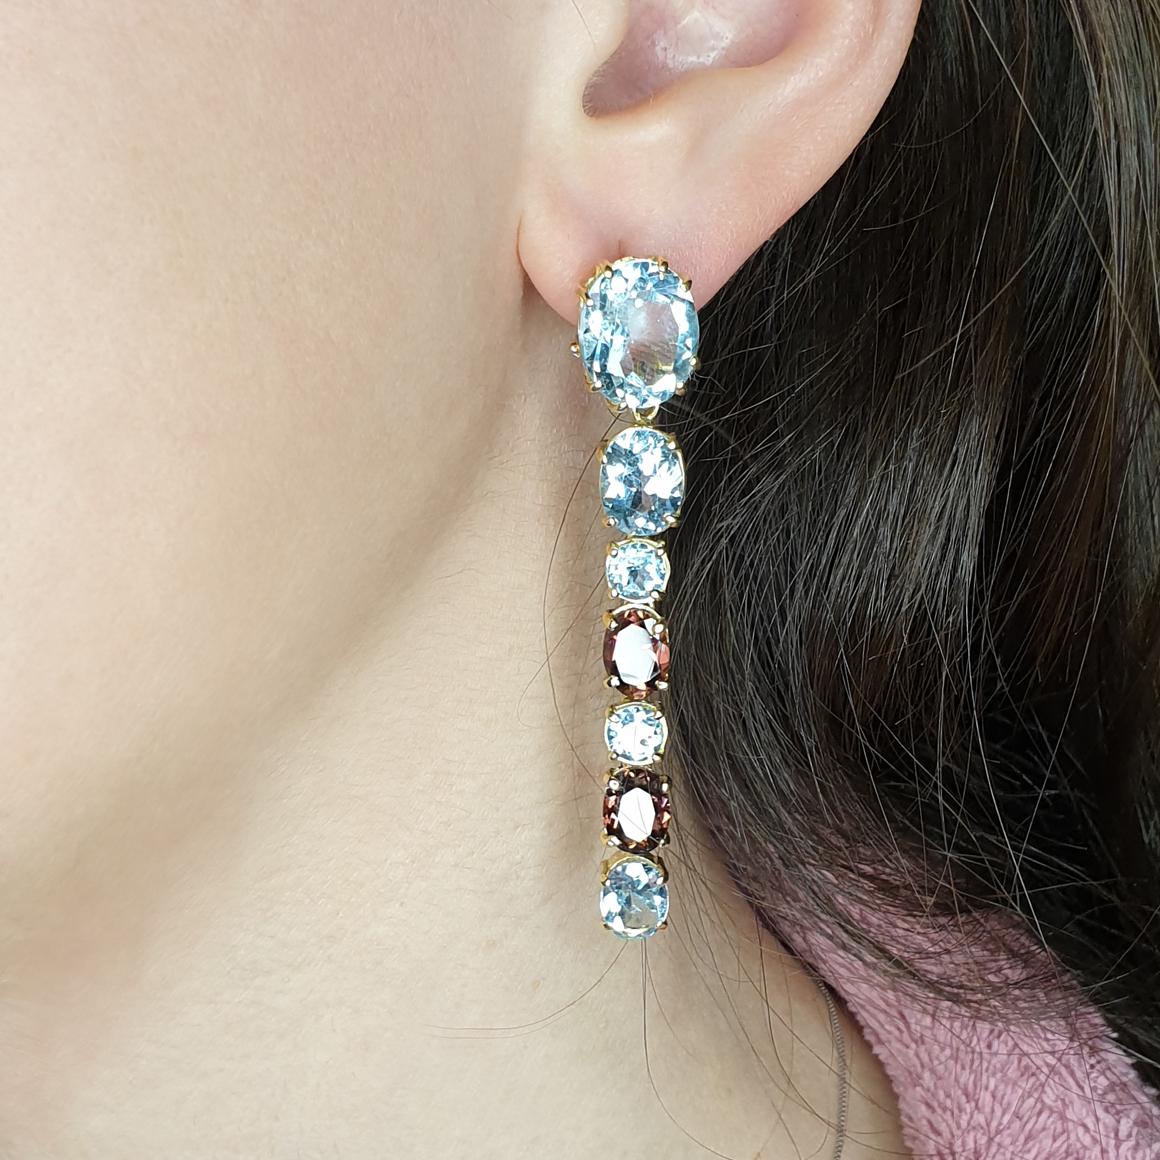 Amazing Earrings in 18k yellow gold with blue Topaz (oval cut, size: mm) pink Tourmaline (oval cut, size: mm)  g.15,50 by Stanoppi Jewellery since 1948


All Stanoppi Jewelry is new and has never been previously owned or worn. Each item will arrive